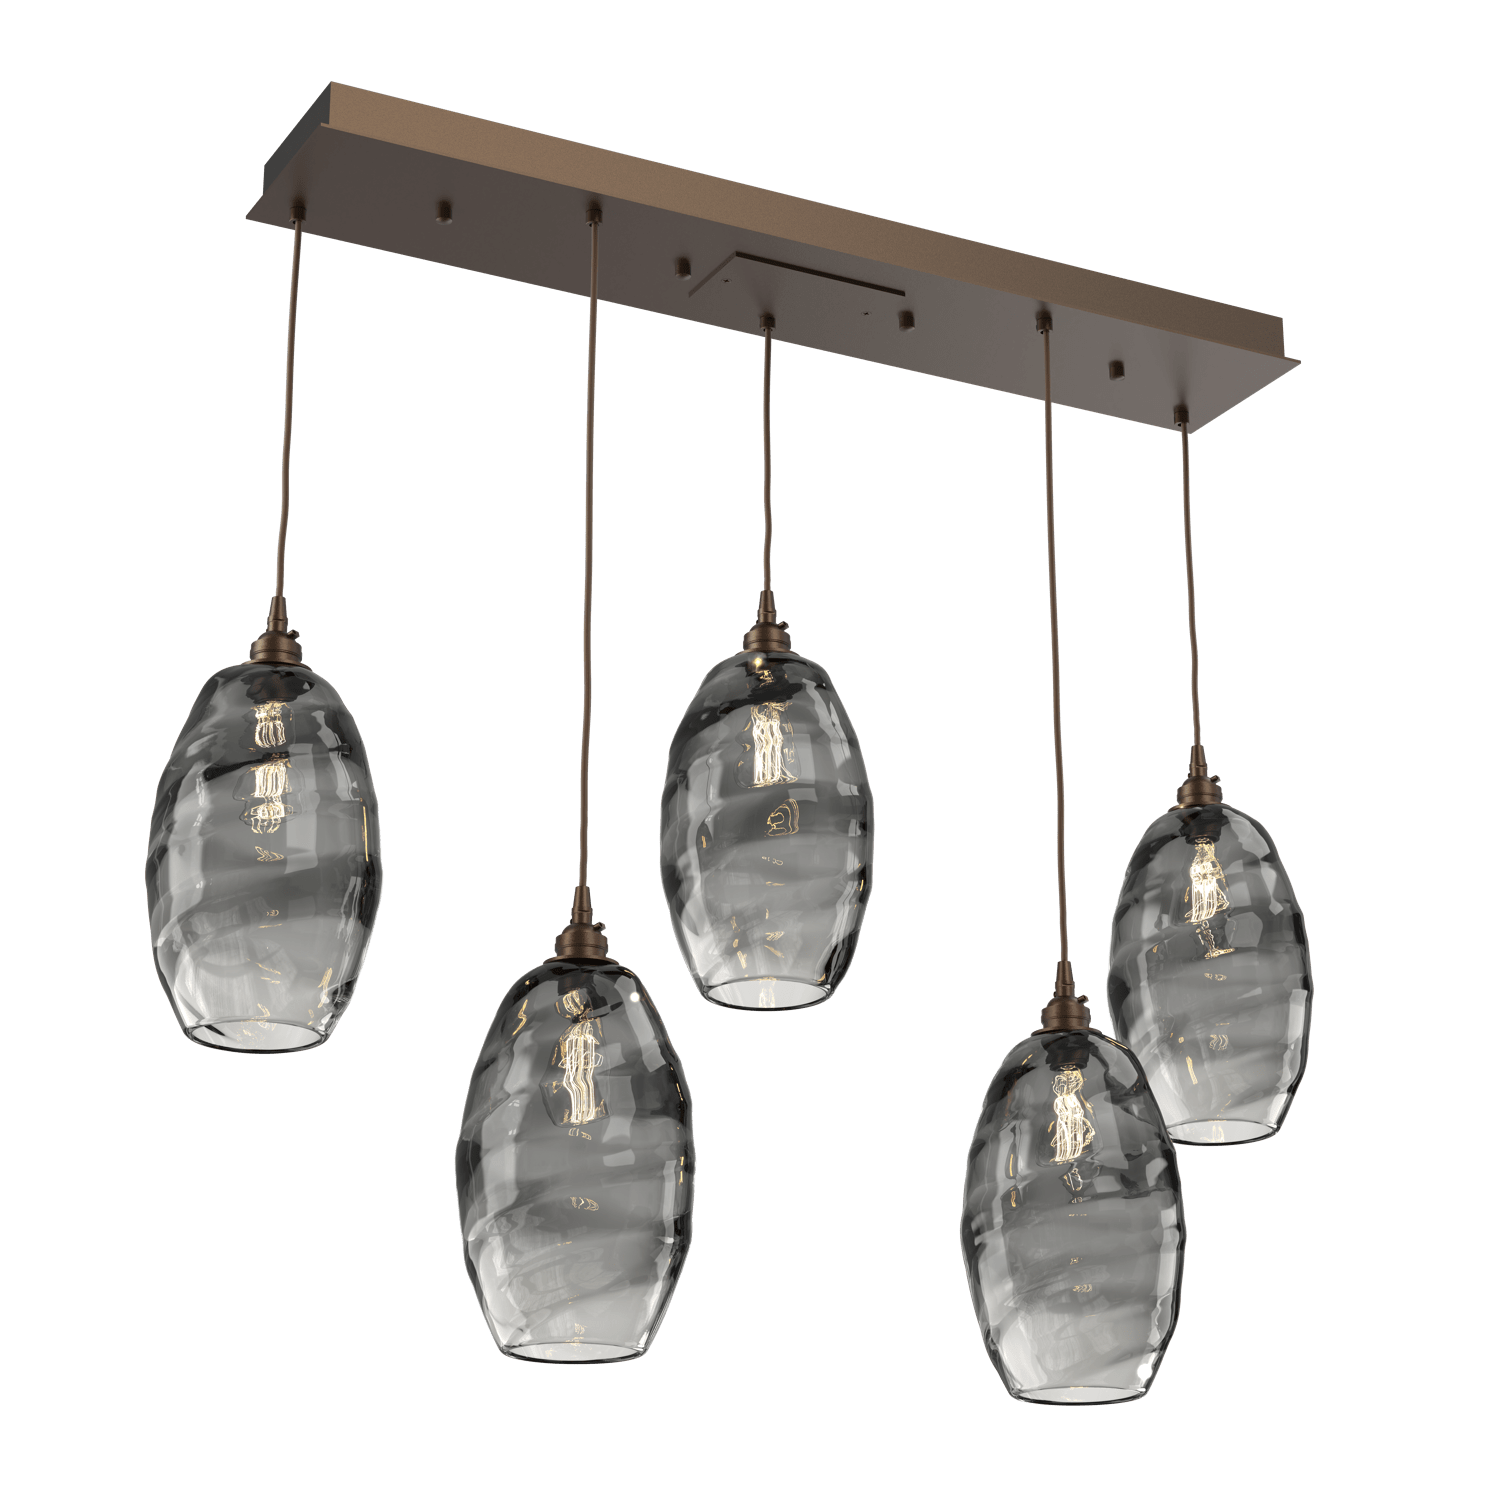 PLB0035-05-FB-OS-Hammerton-Studio-Optic-Blown-Glass-Elisse-5-light-linear-pendant-chandelier-with-flat-bronze-finish-and-optic-smoke-blown-glass-shades-and-incandescent-lamping